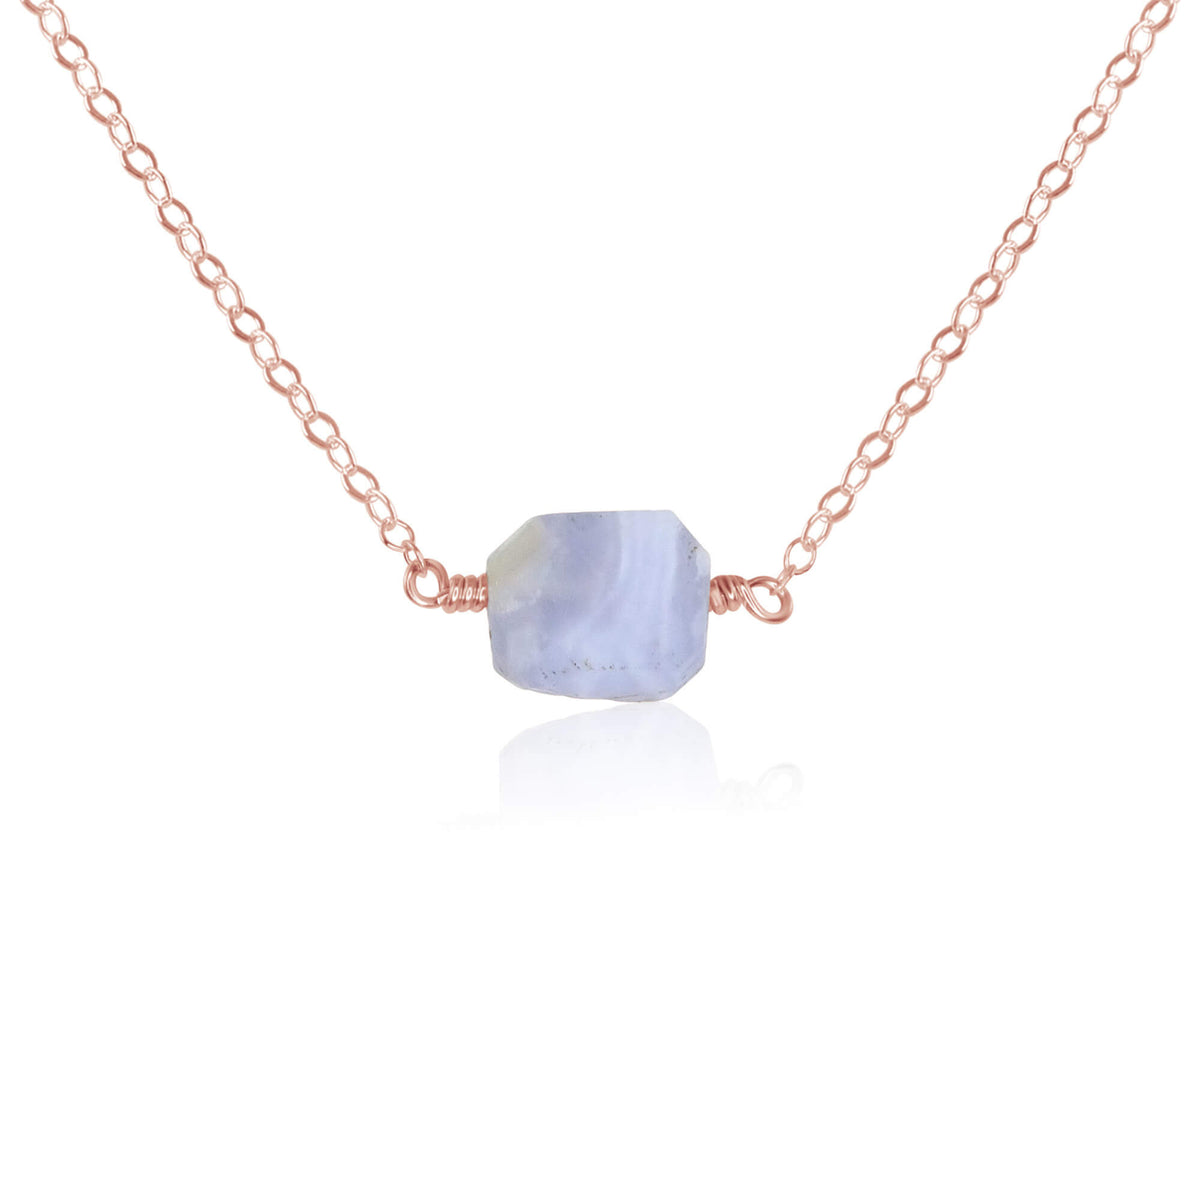 Raw Nugget Necklace - Blue Lace Agate - 14K Rose Gold Fill - Luna Tide Handmade Jewellery